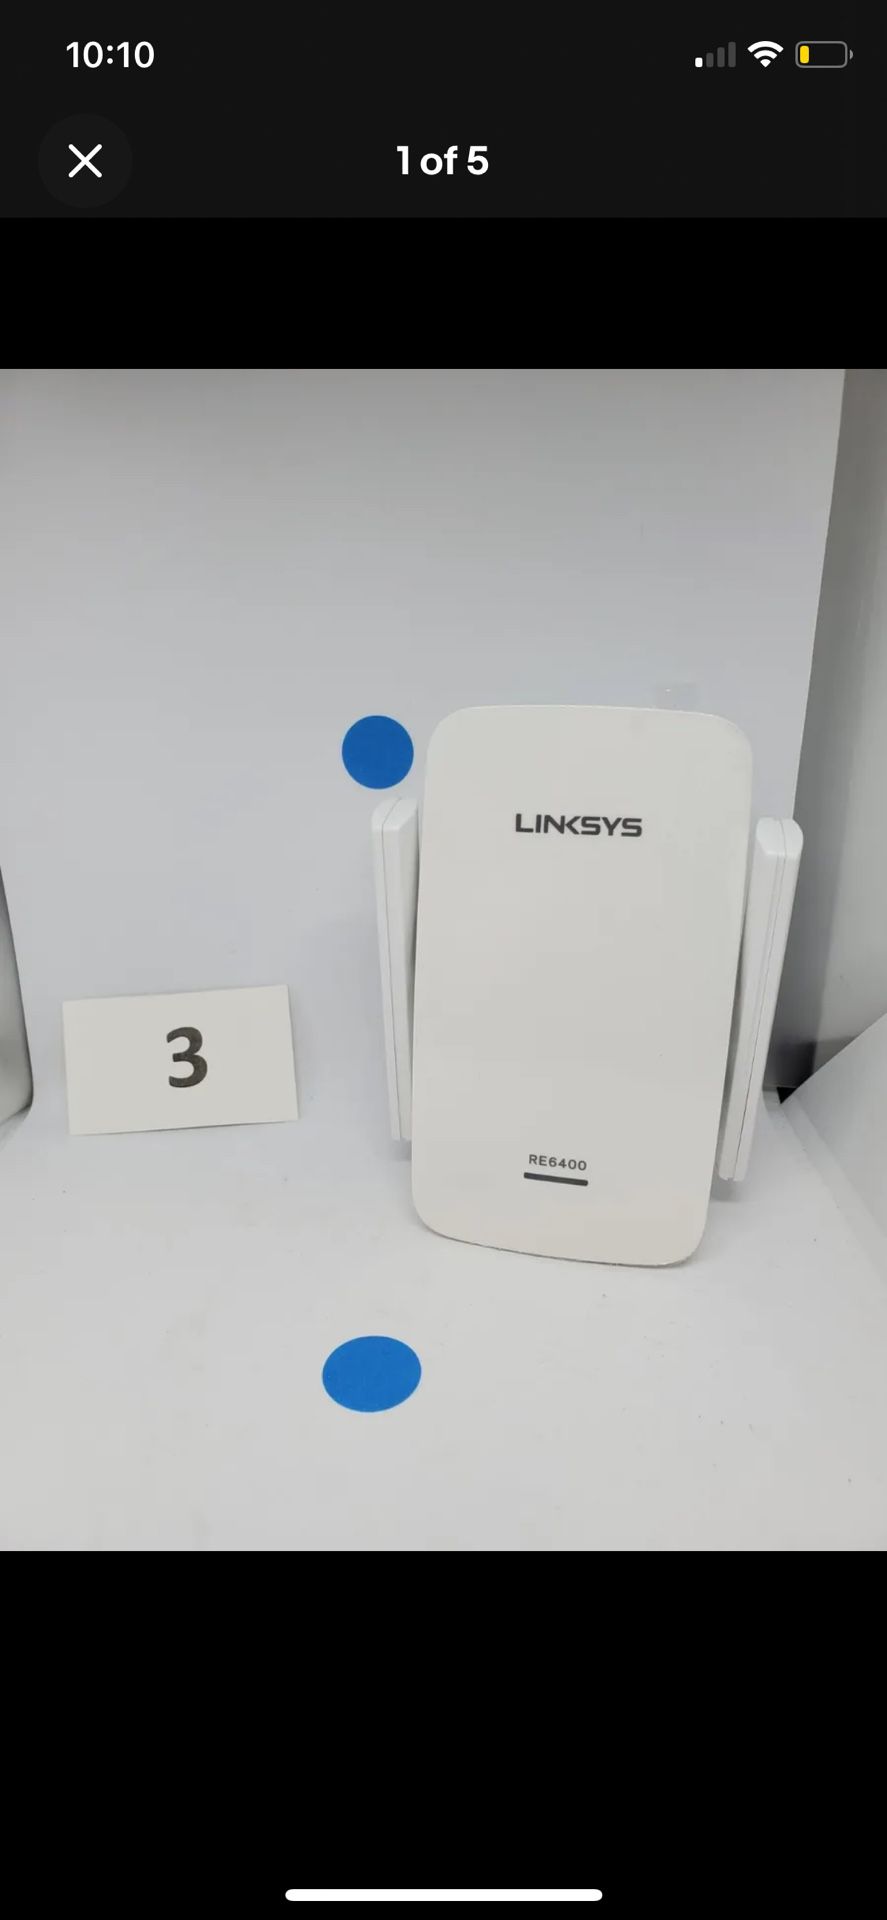 Linksys RE6400 Wi-Fi Range Extender / WiFi Booster Access Point